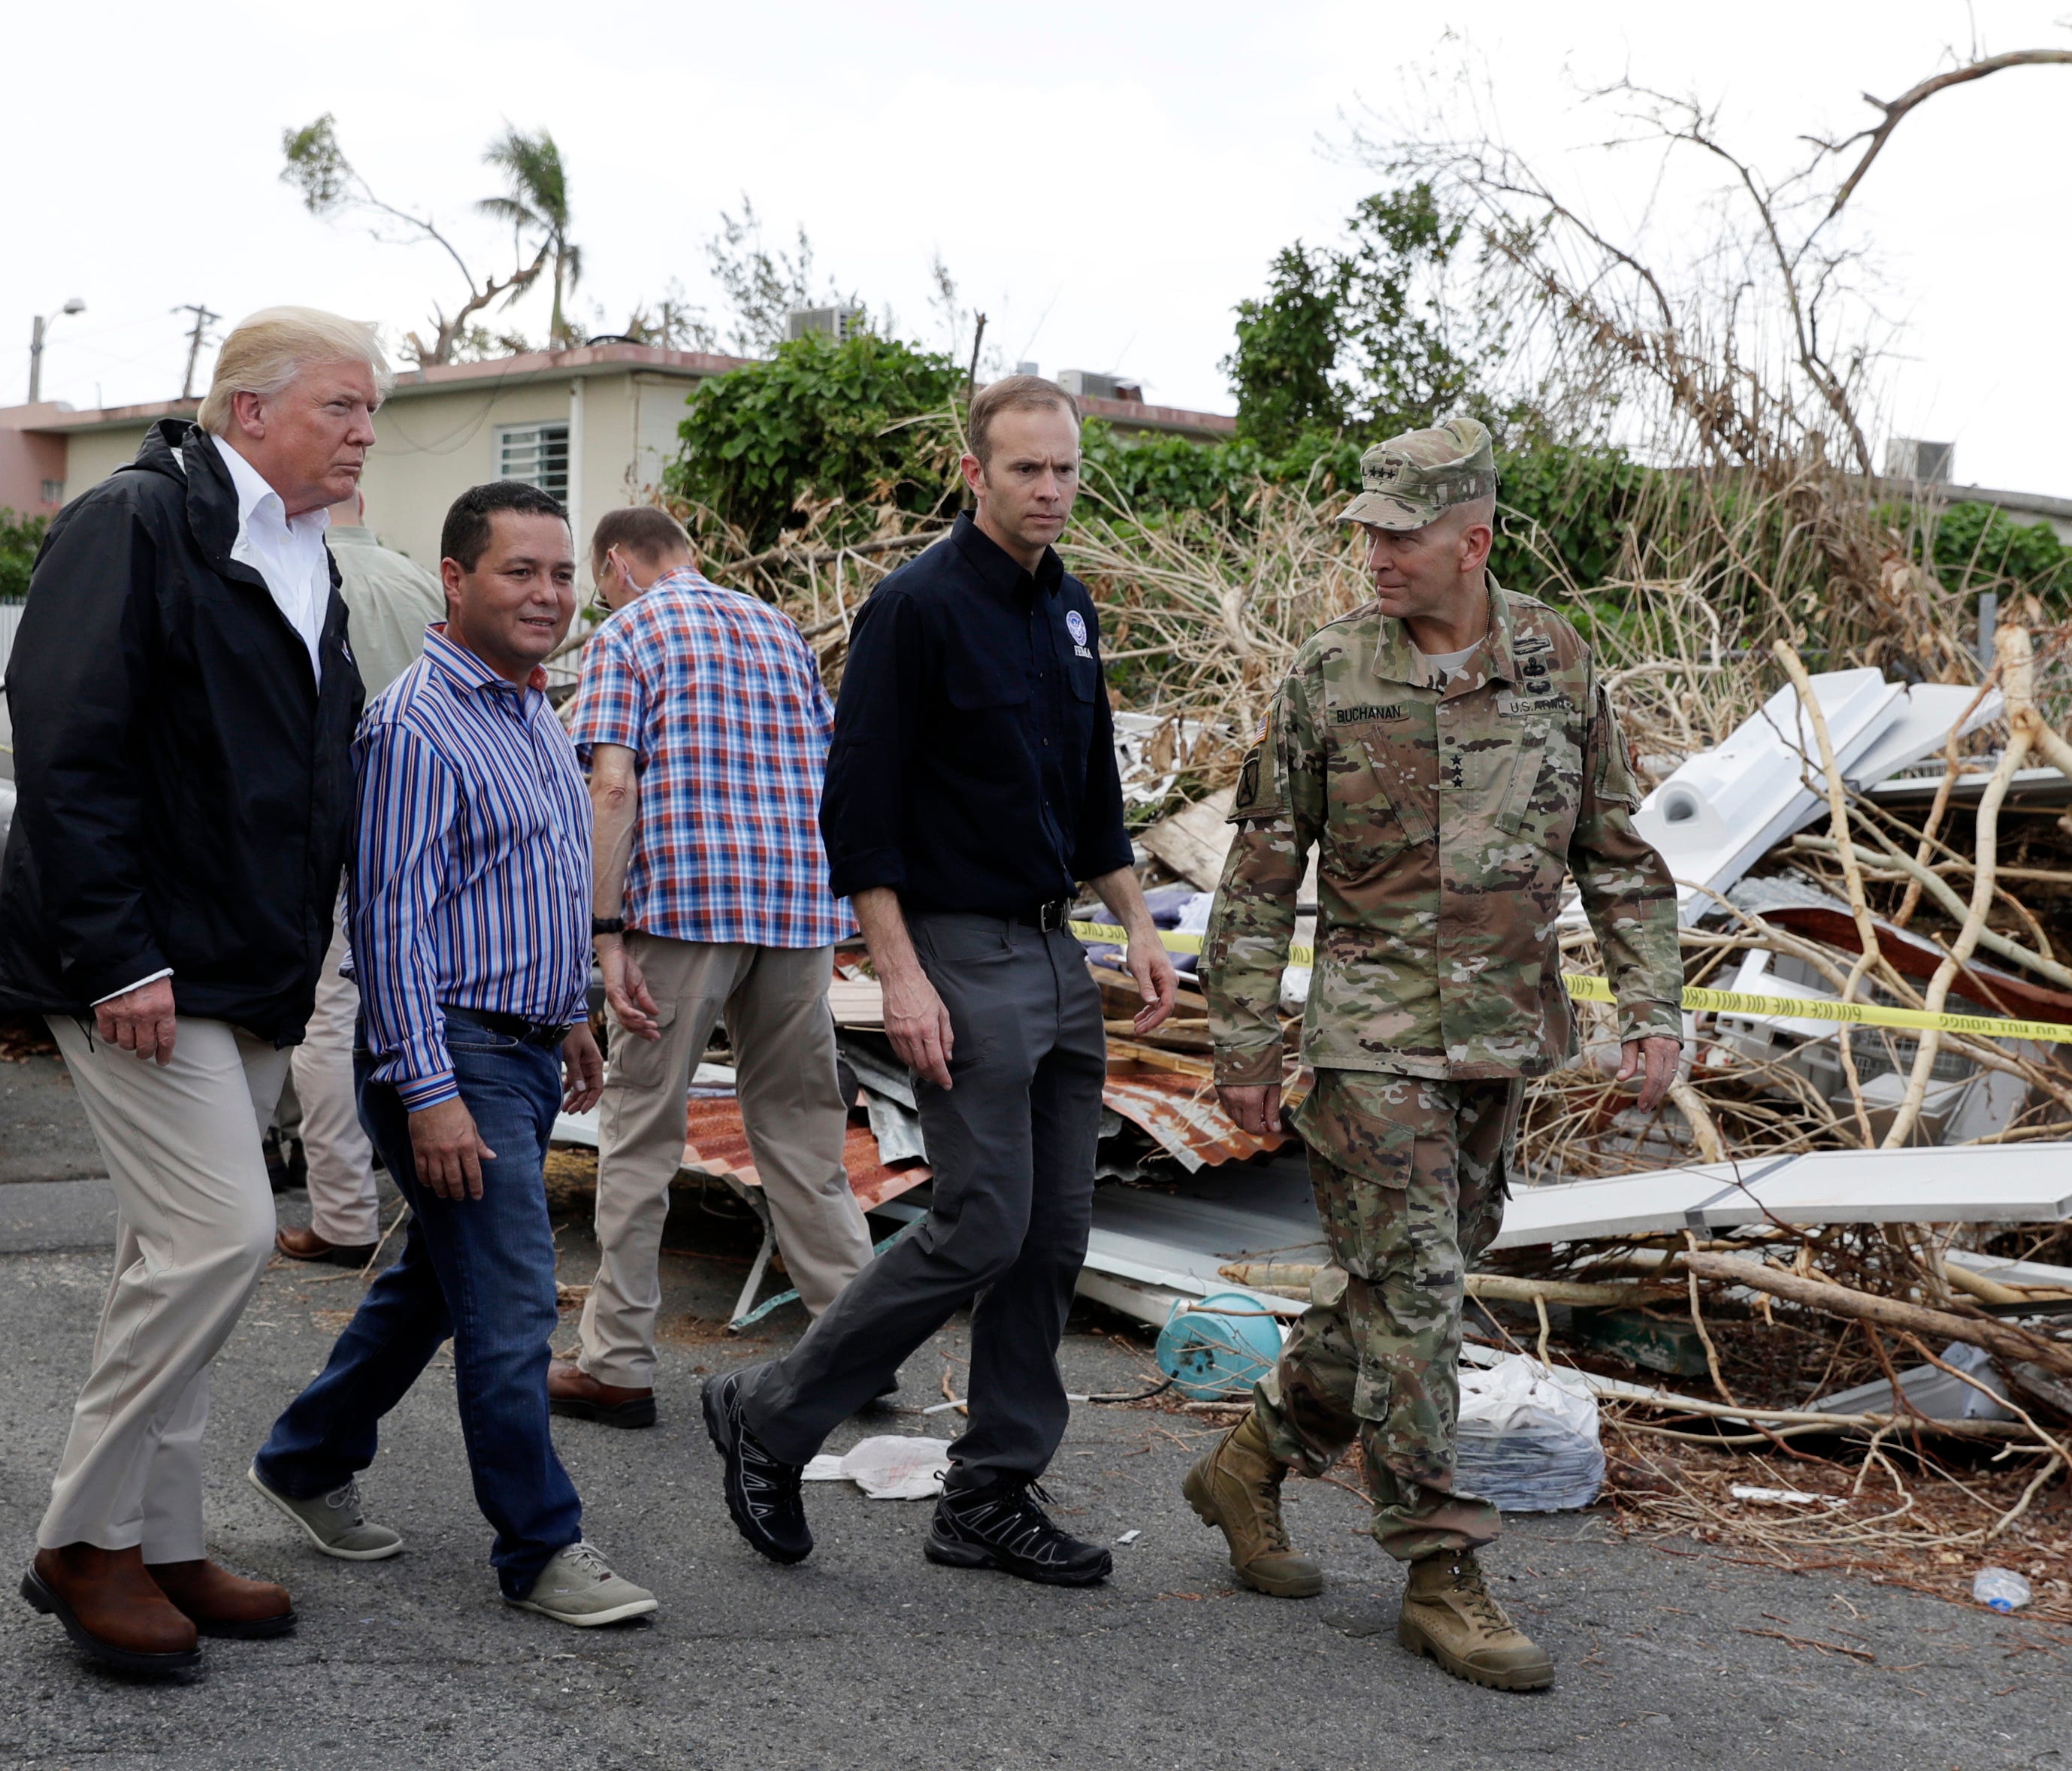 President Trump walks with FEMA administrator Brock Long, second from right, and Lt. Gen. Jeff Buchanan, right as he tours an area affected by Hurricane Maria in Guaynabo, Puerto Rico, on Oct. 3, 2017.